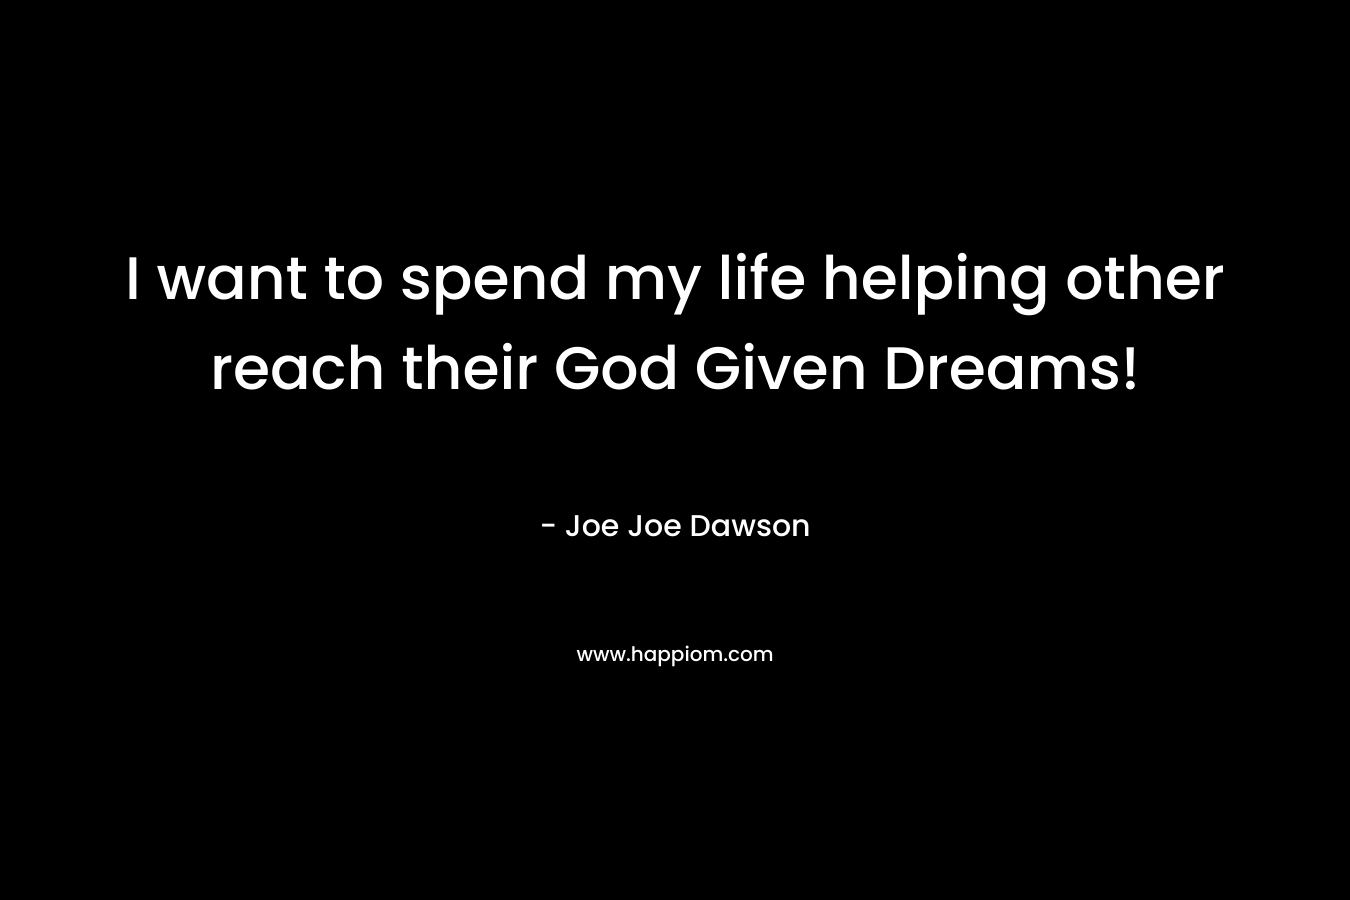 I want to spend my life helping other reach their God Given Dreams!